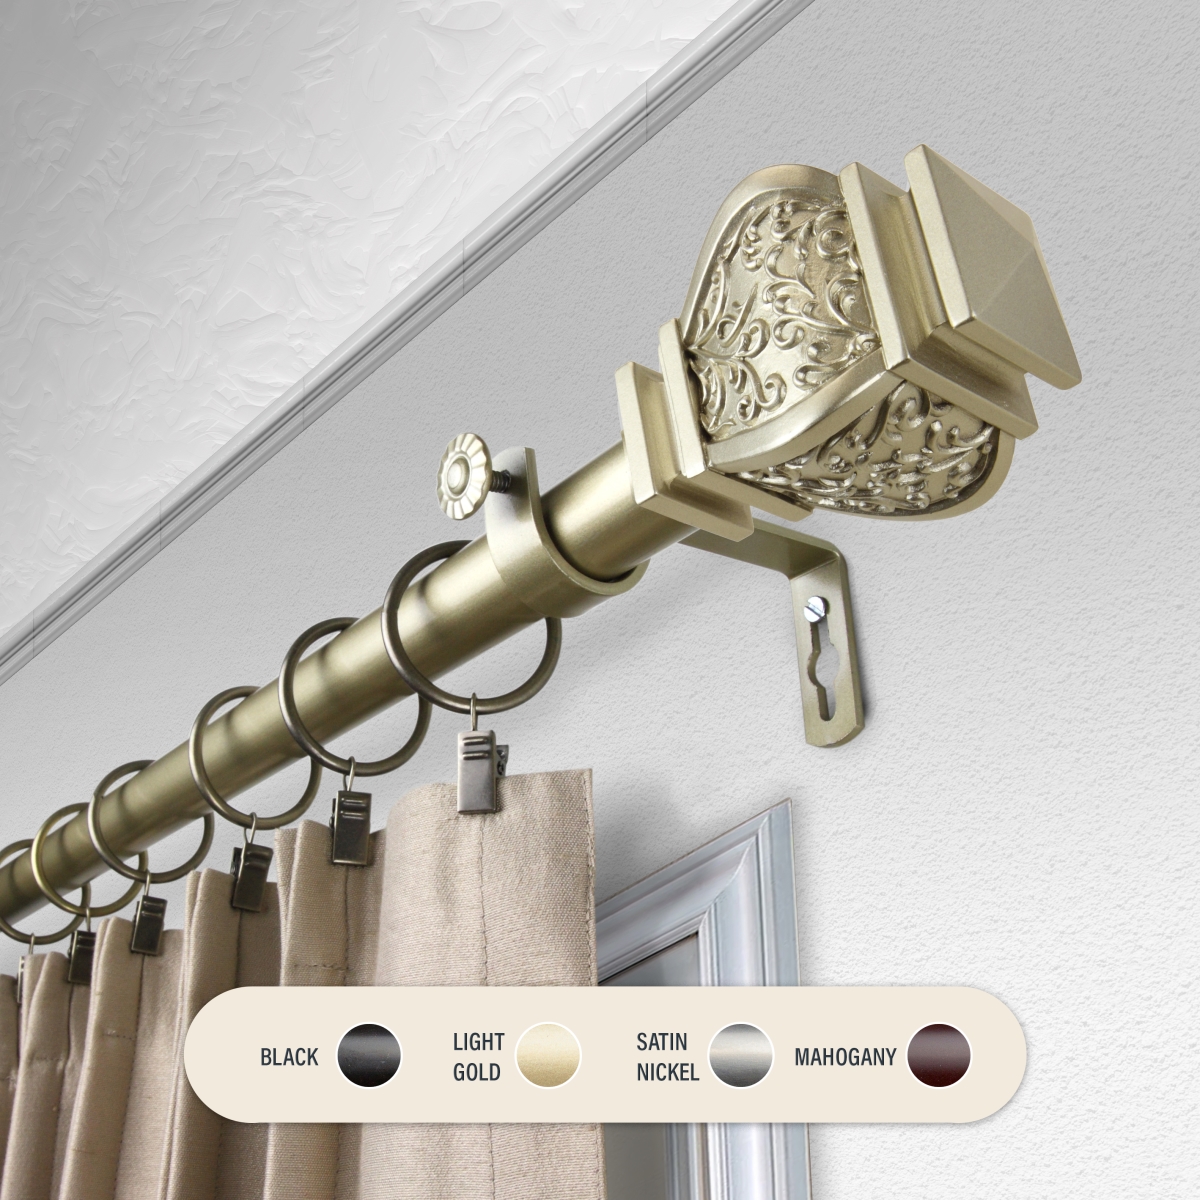 Picture of Central Design 100-14-663 1 in. Harrison Curtain Rod with 66 to 120 in. Extension, Light Gold